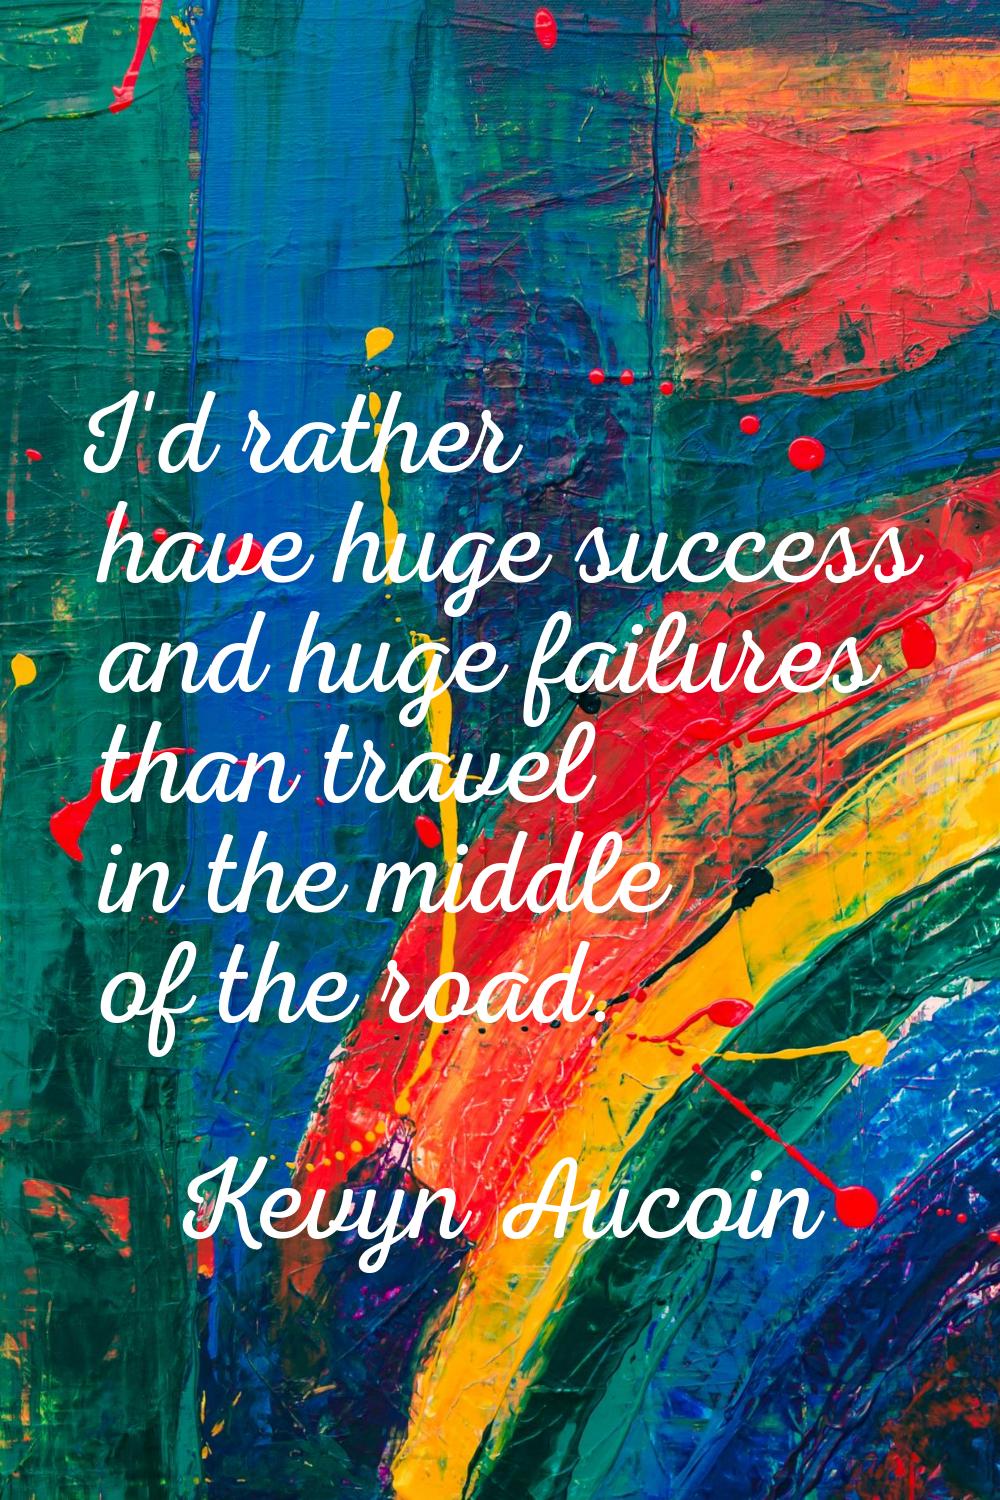 I'd rather have huge success and huge failures than travel in the middle of the road.